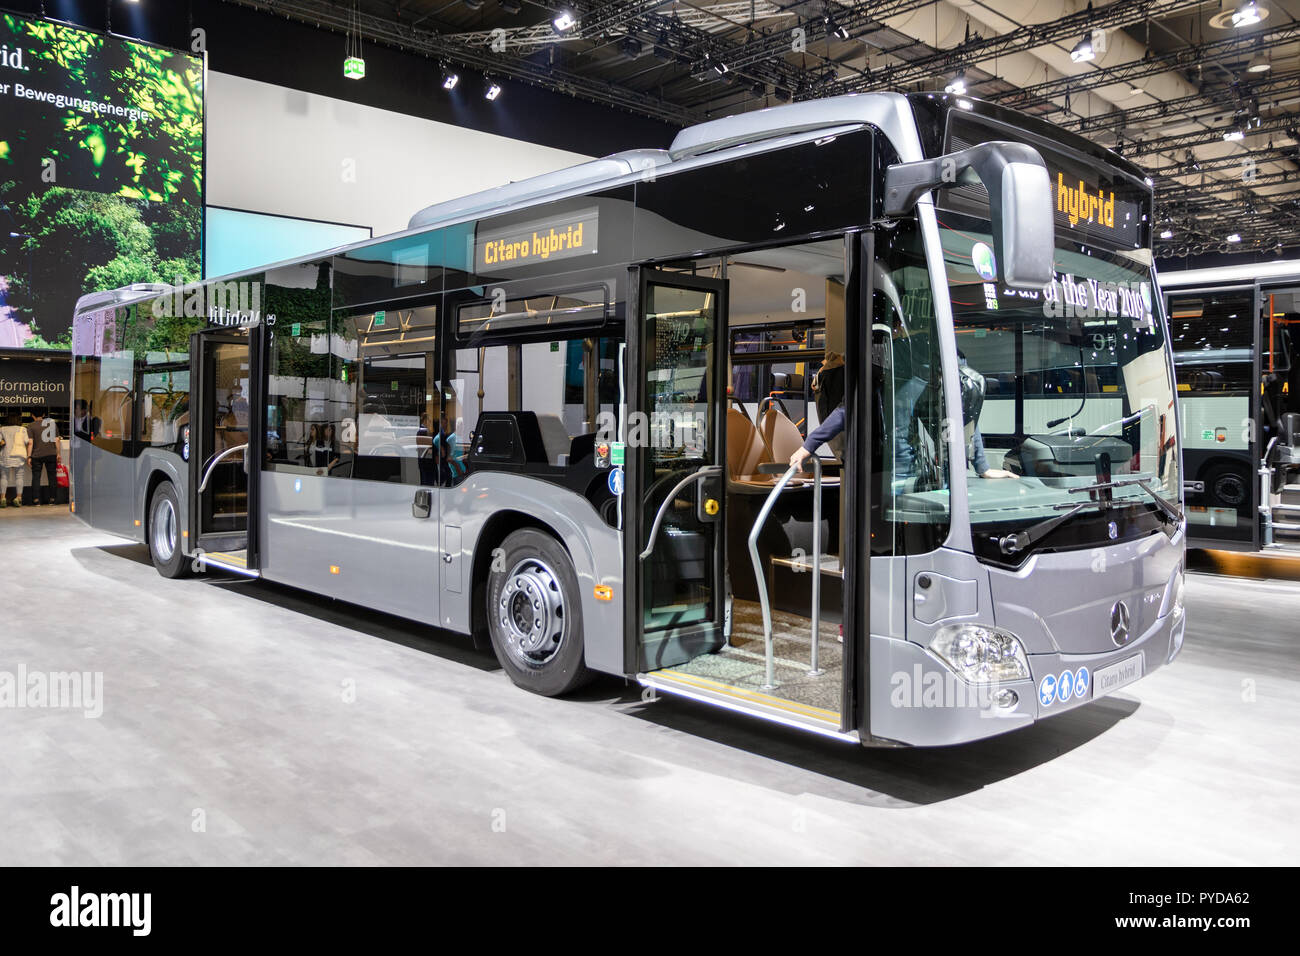 HANNOVER, GERMANY - SEP 27, 2018: New Citaro Hybrid bus showcased at the Hannover IAA Commercial Vehicles Motor Show Stock Photo - Alamy